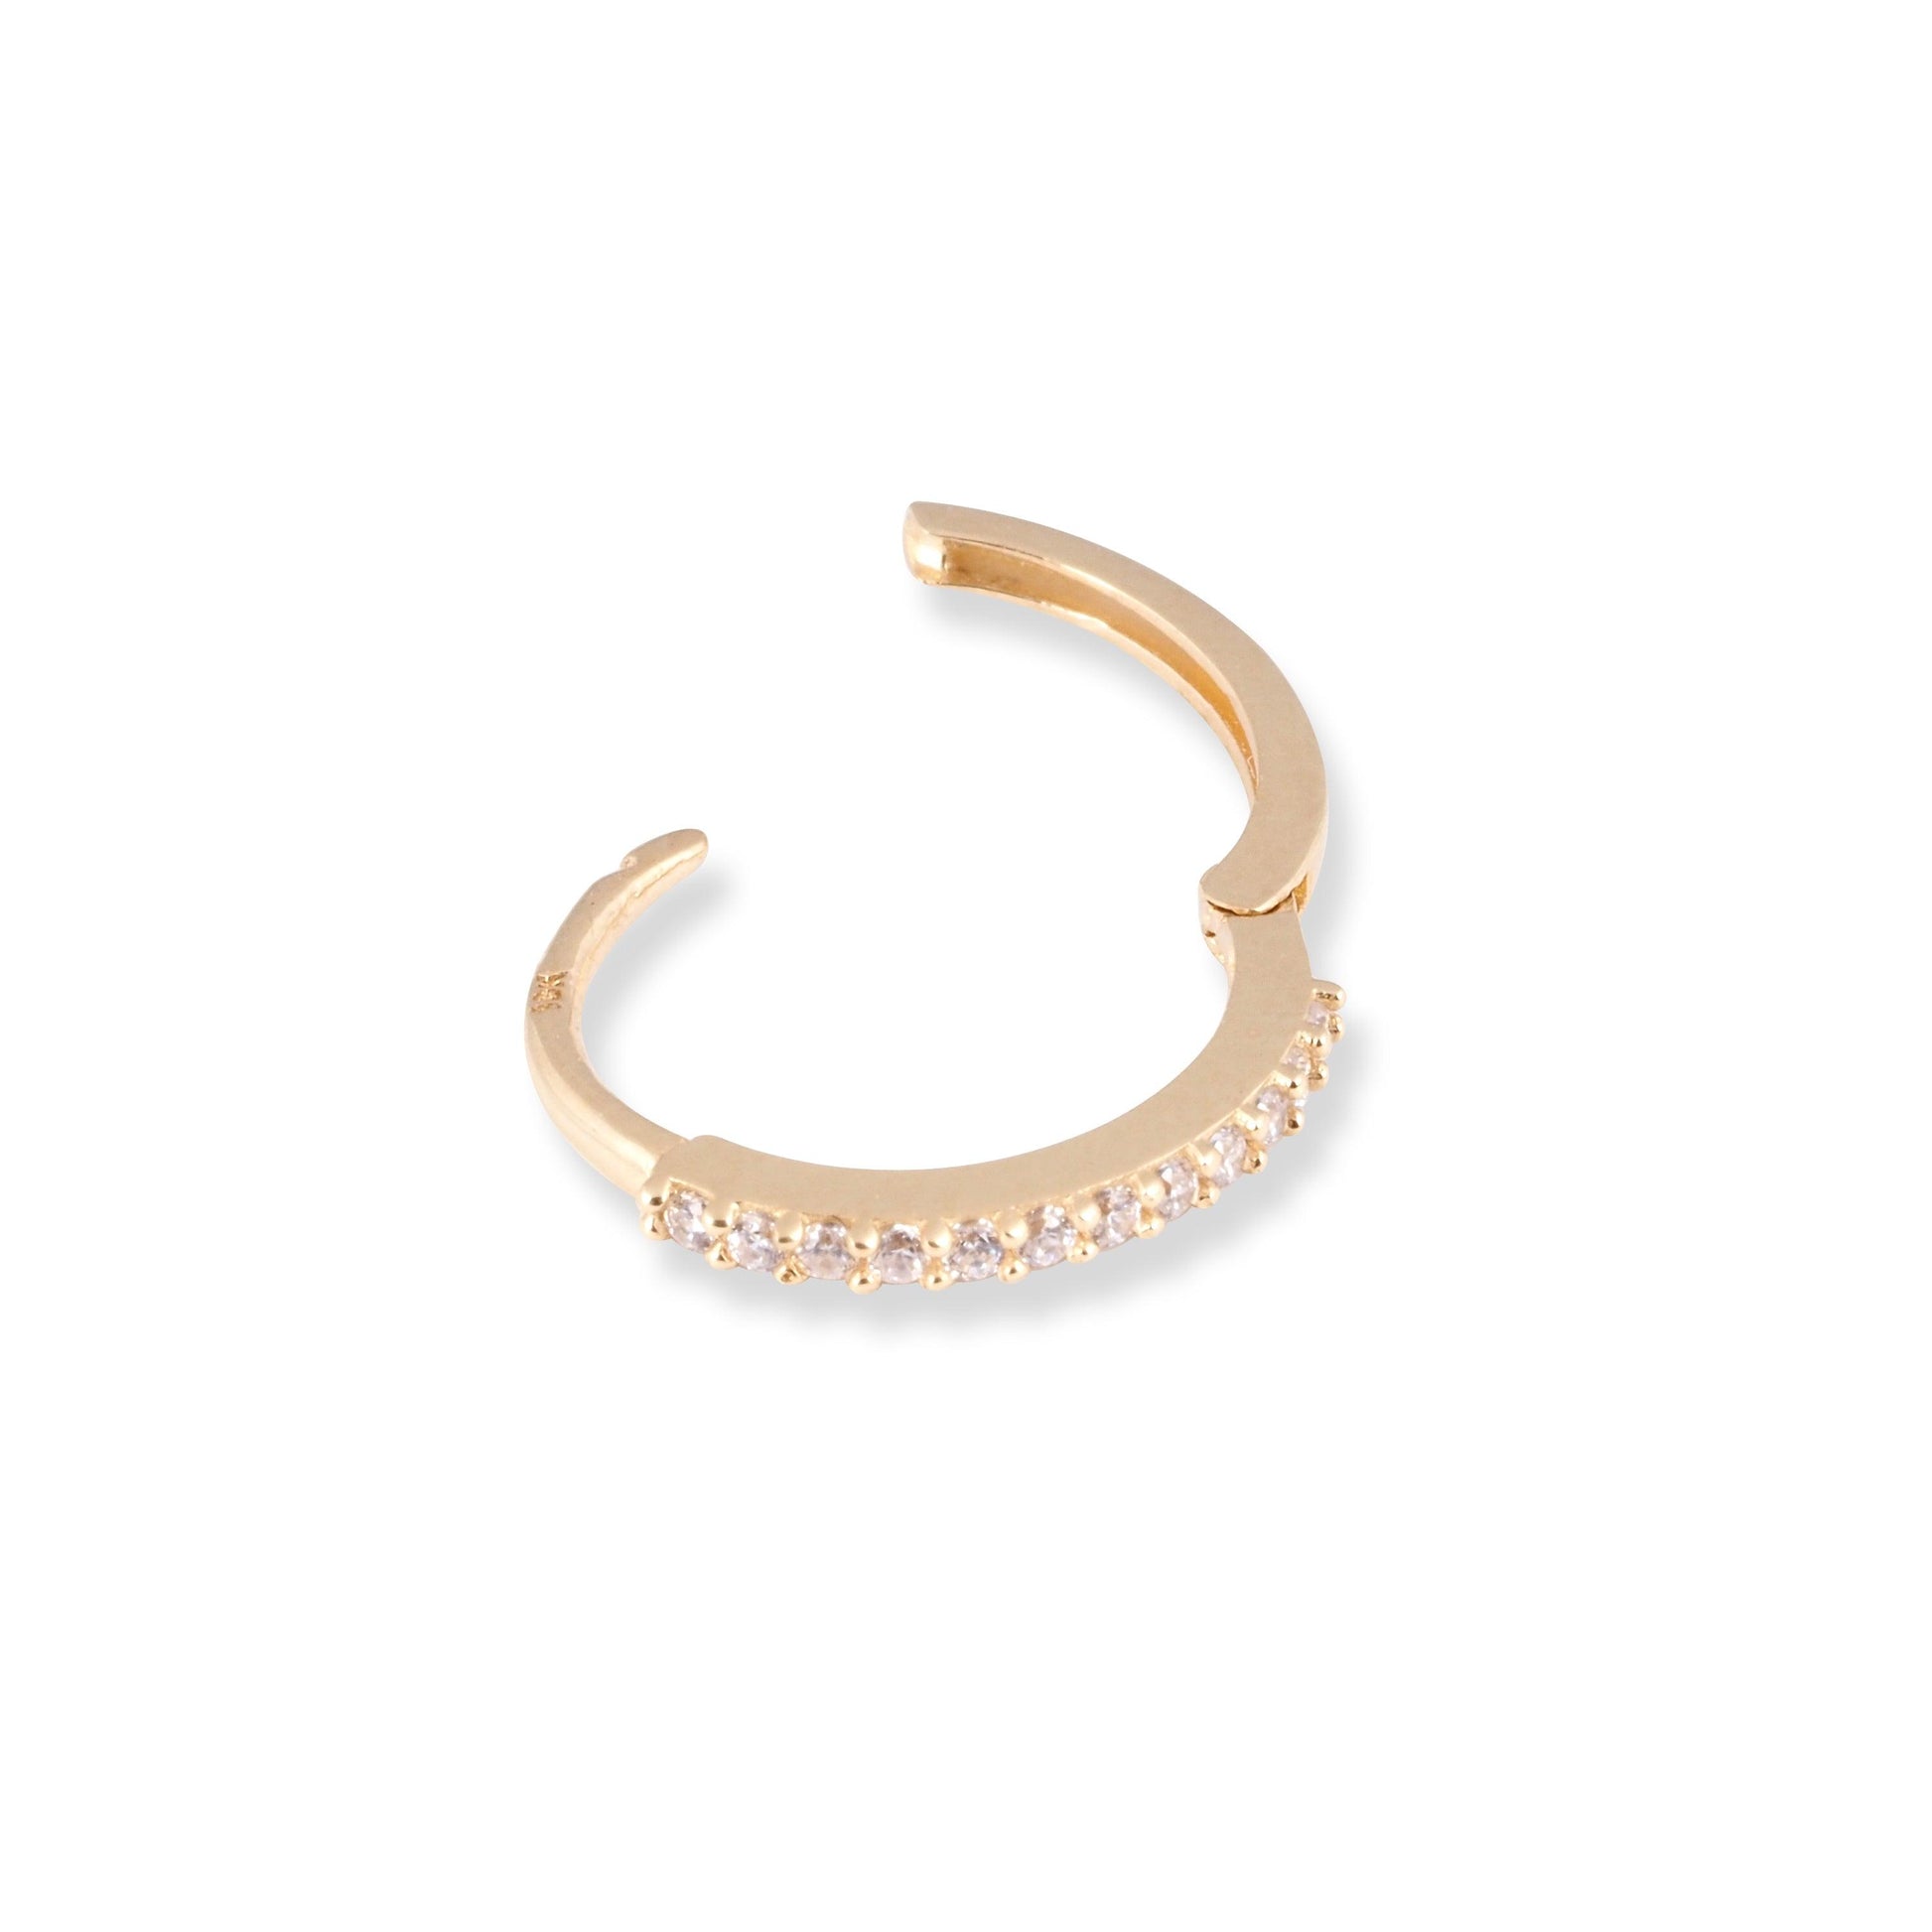 18ct Yellow / White Gold Nose Ring With Cubic Zirconia Stones (6mm-12mm) NR-7833 - Minar Jewellers